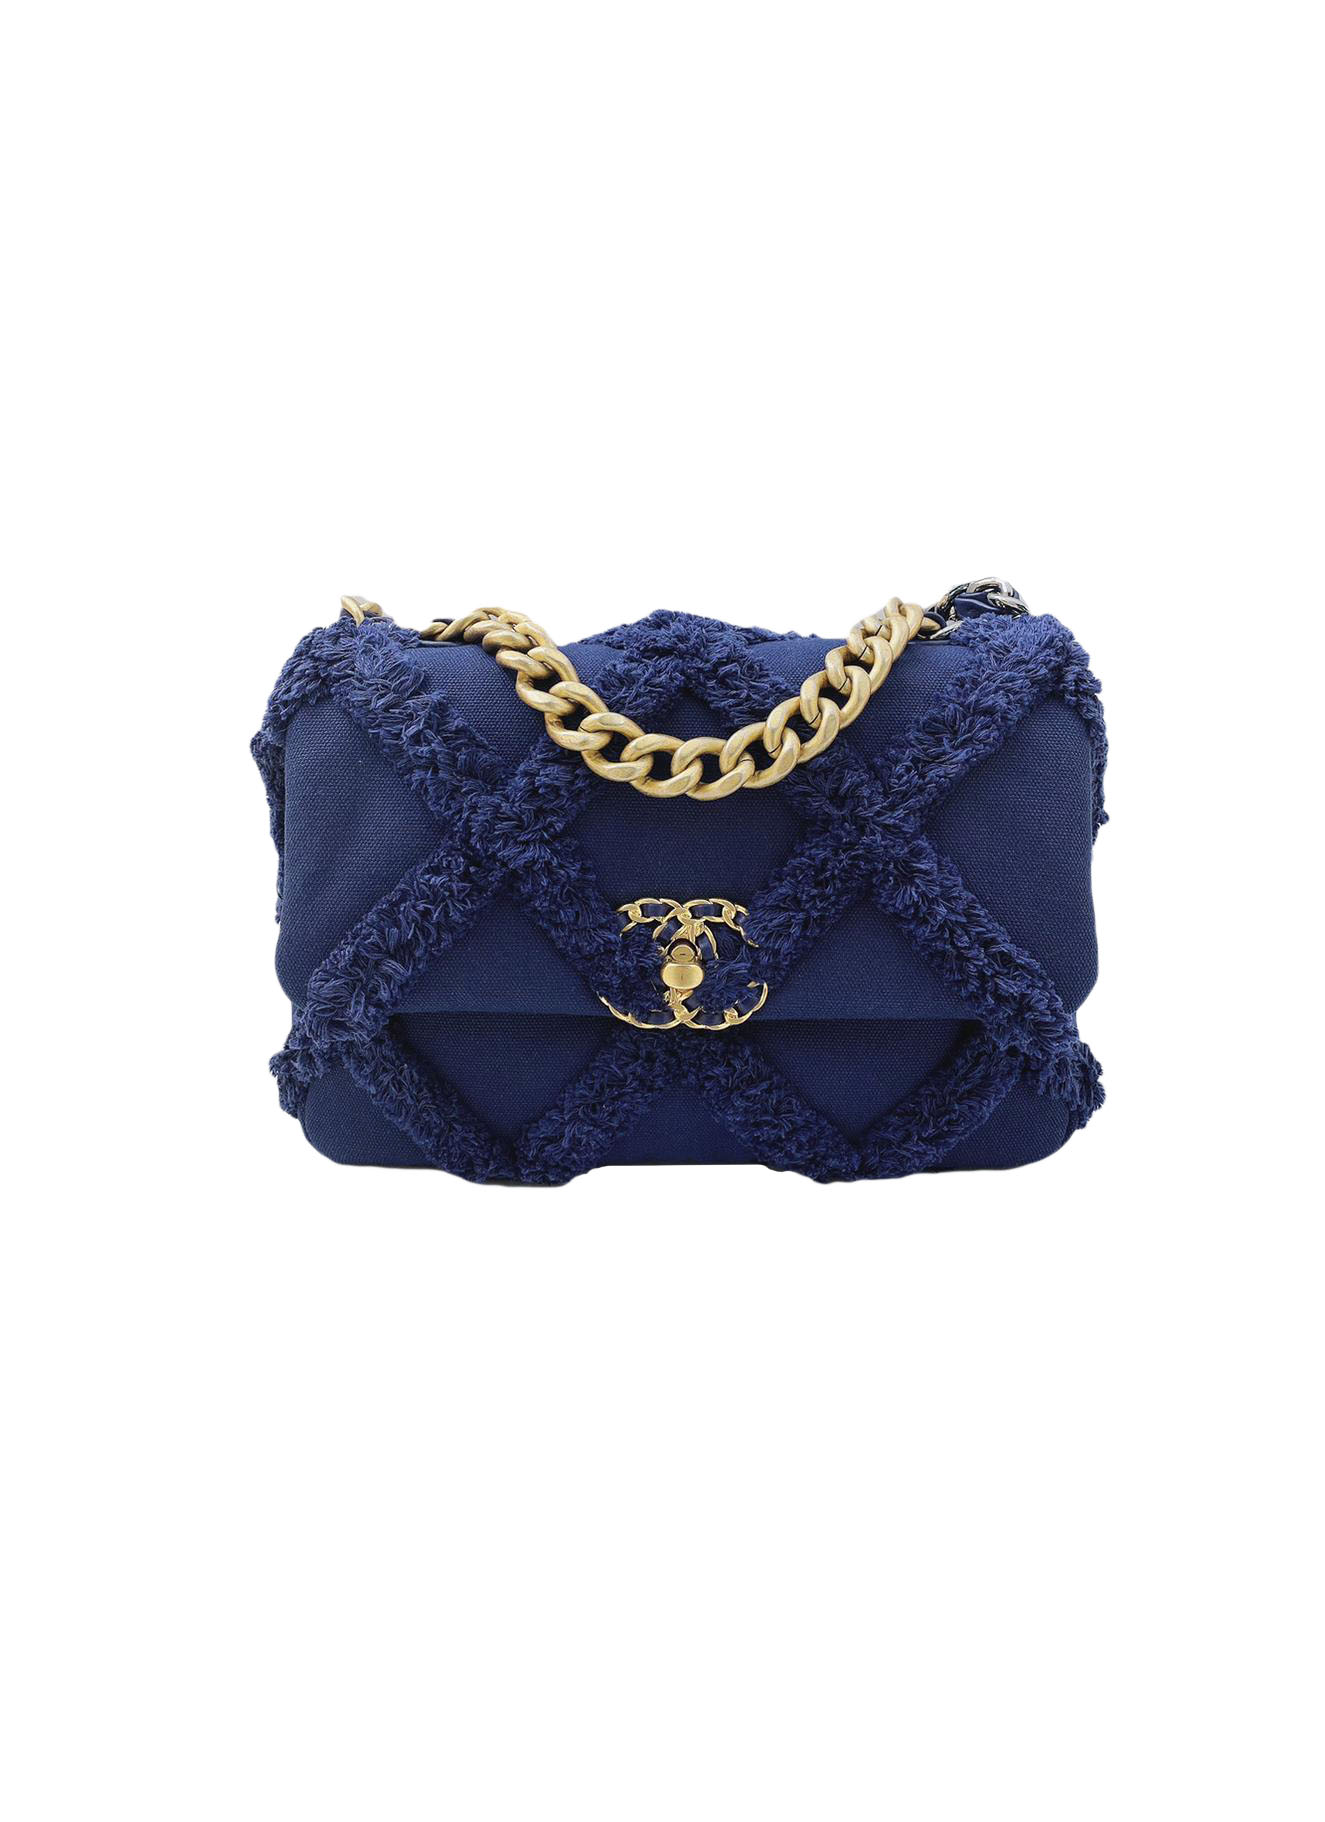 CHANEL Cotton Exterior Quilted Bags & Handbags for Women